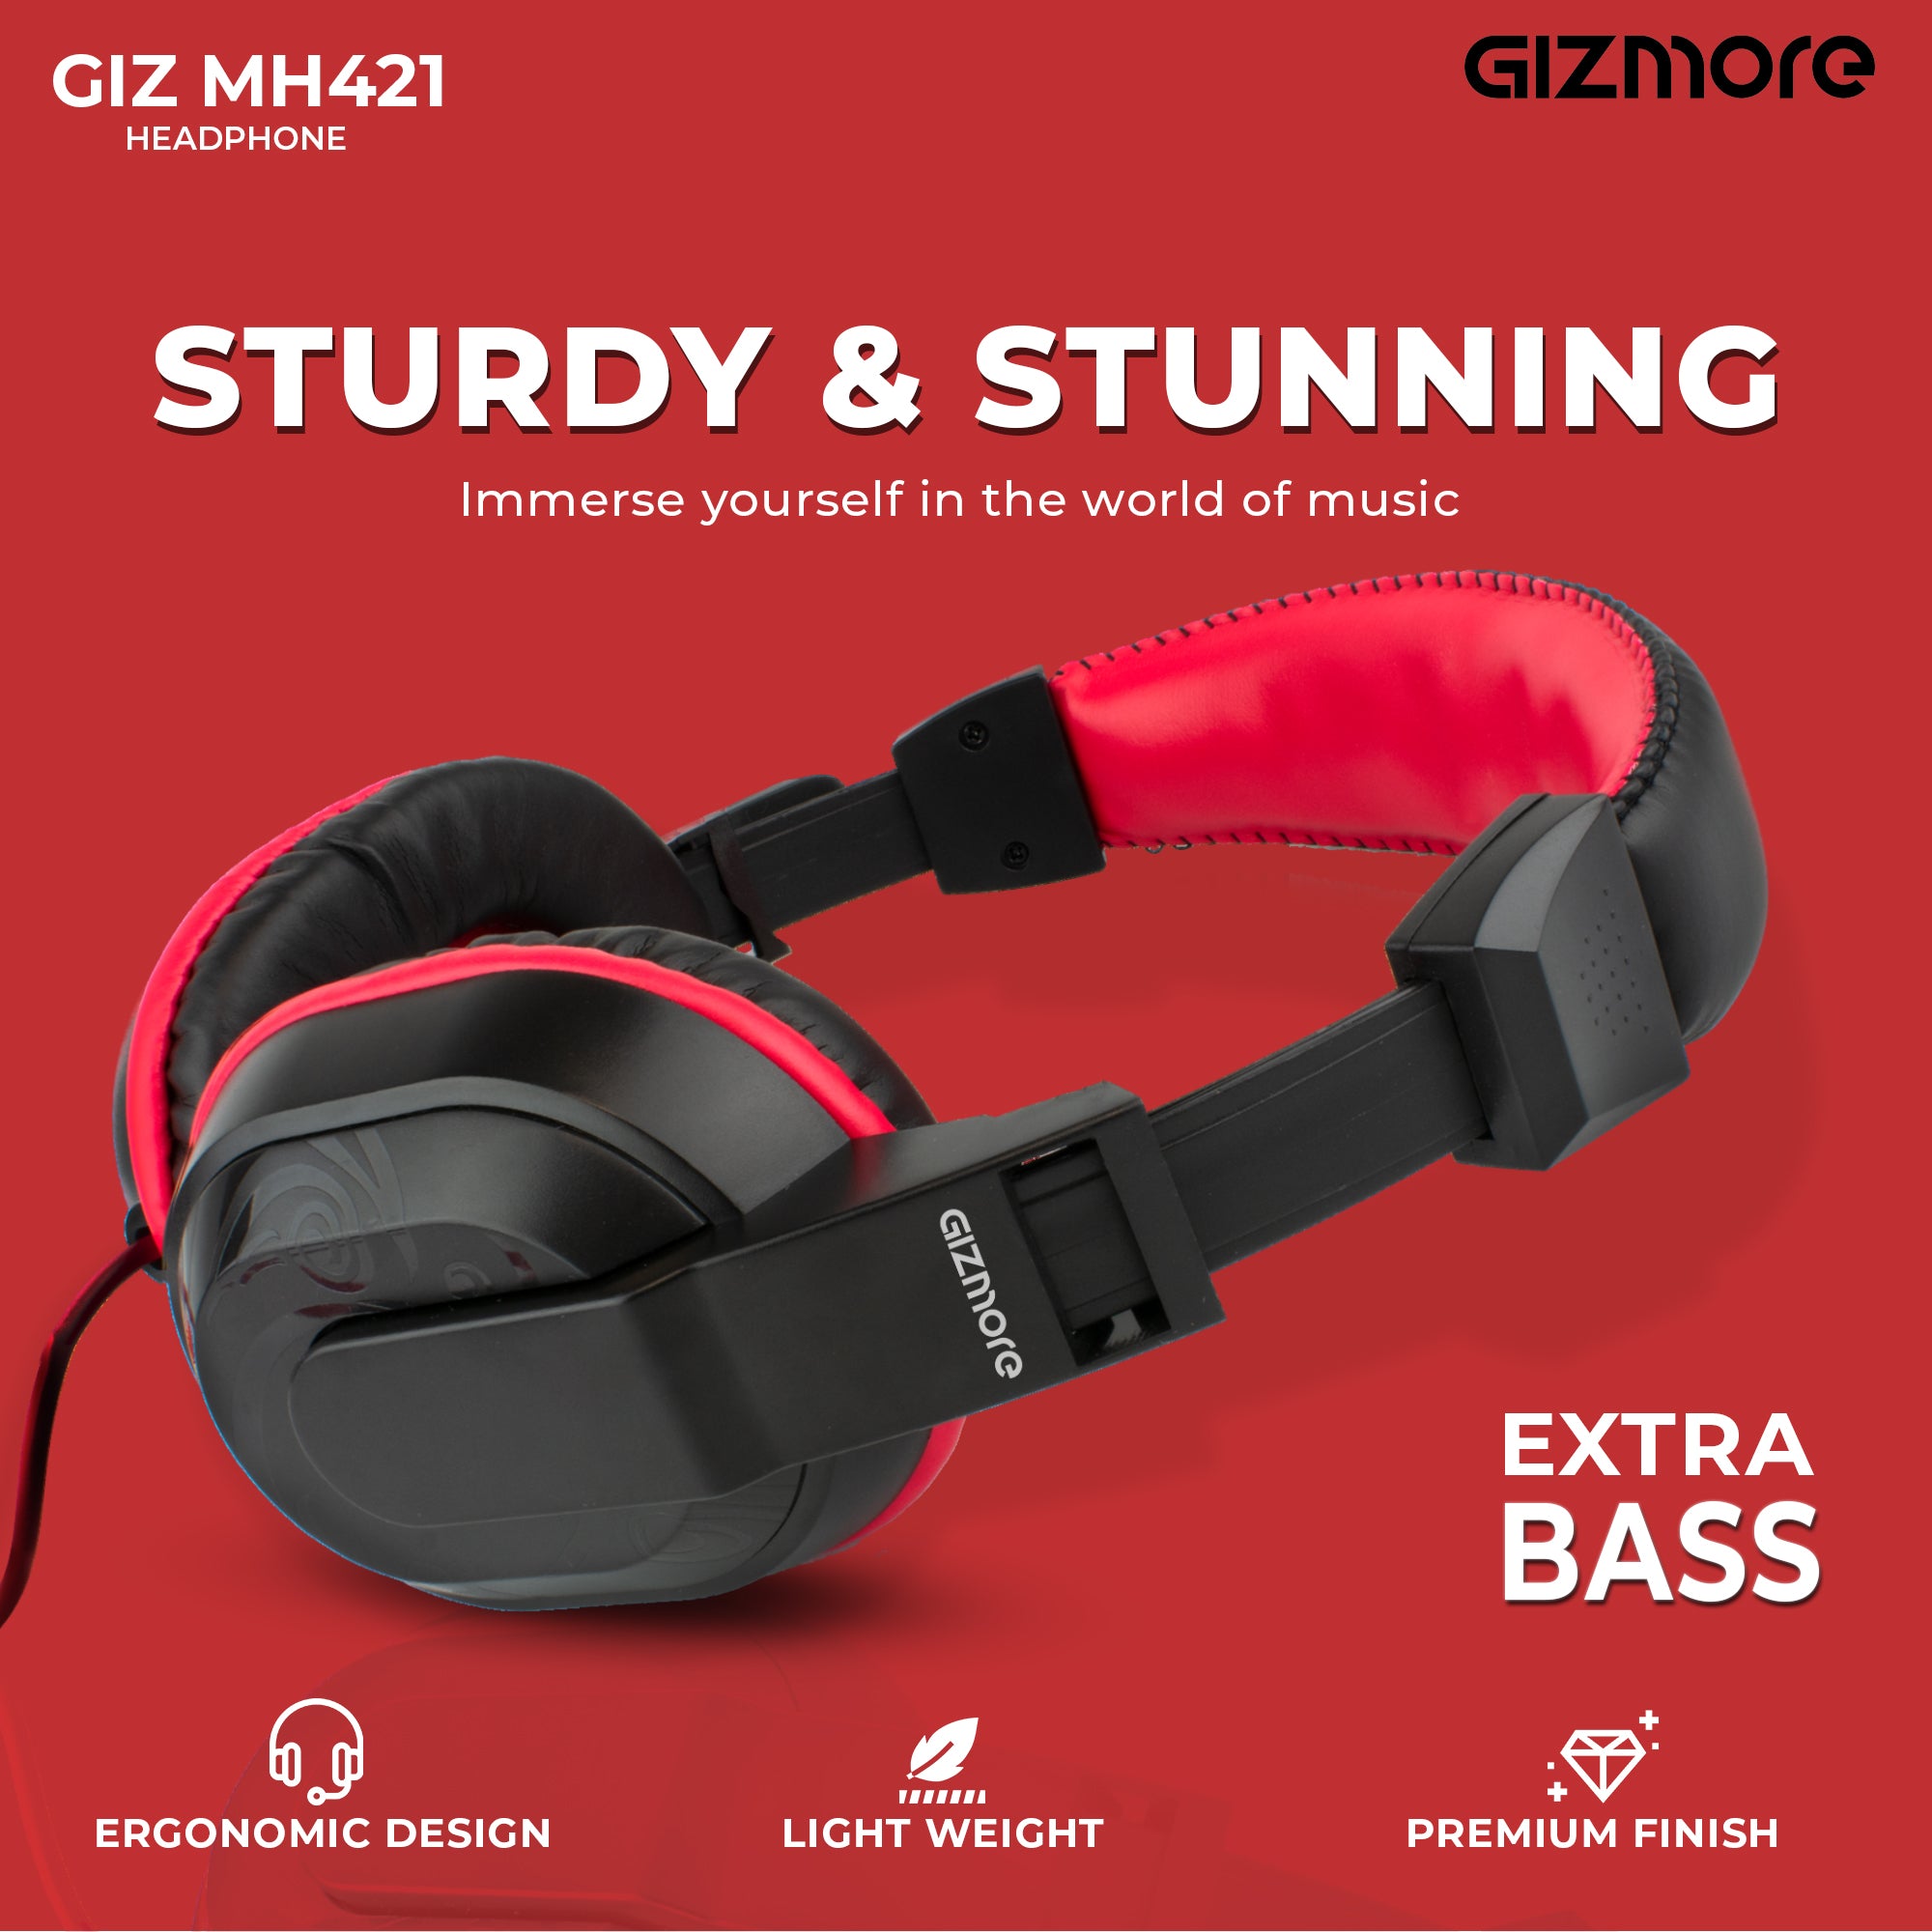 GIZMORE MH421 Wired Over Ear Headphone with Microphone Stereo Headset, 3.5 mm Audio Input, Volume Control Wheel, Adjustable Headband Compatible with Laptop, PC, Smartphones (Black)